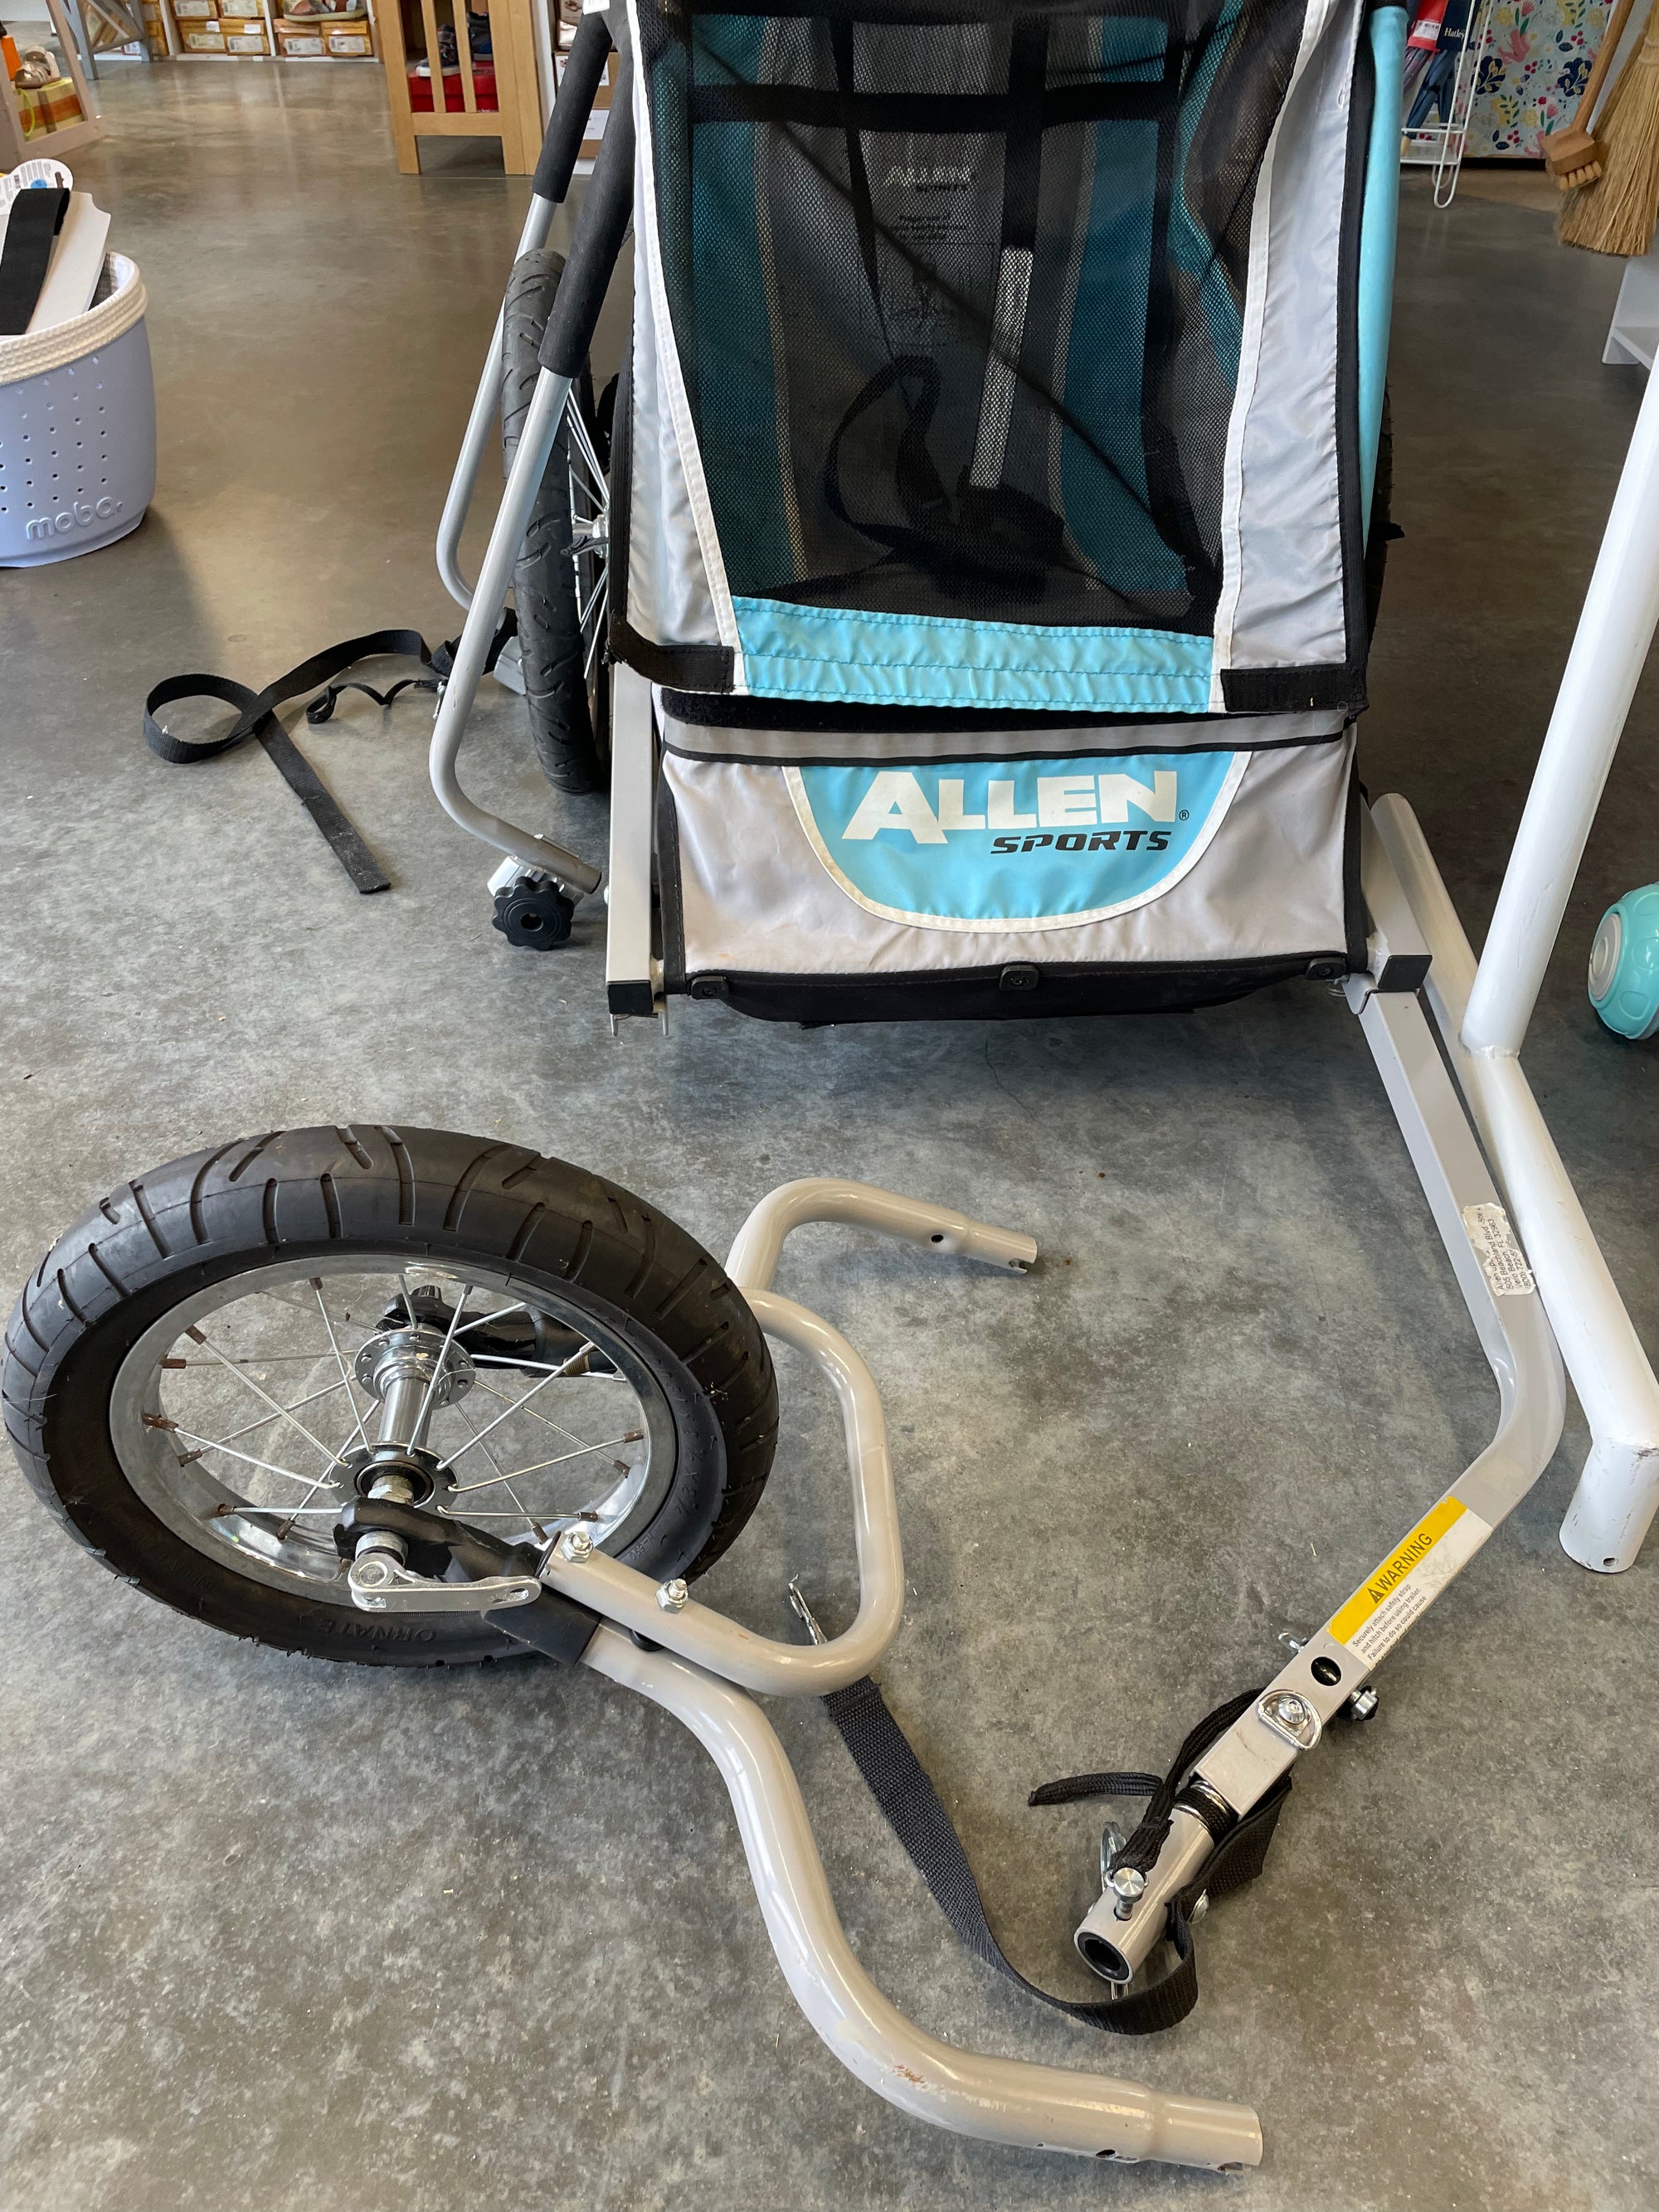 Resale Allen Sports Bicycle Trailer and Strolller - Local Pic Up Only